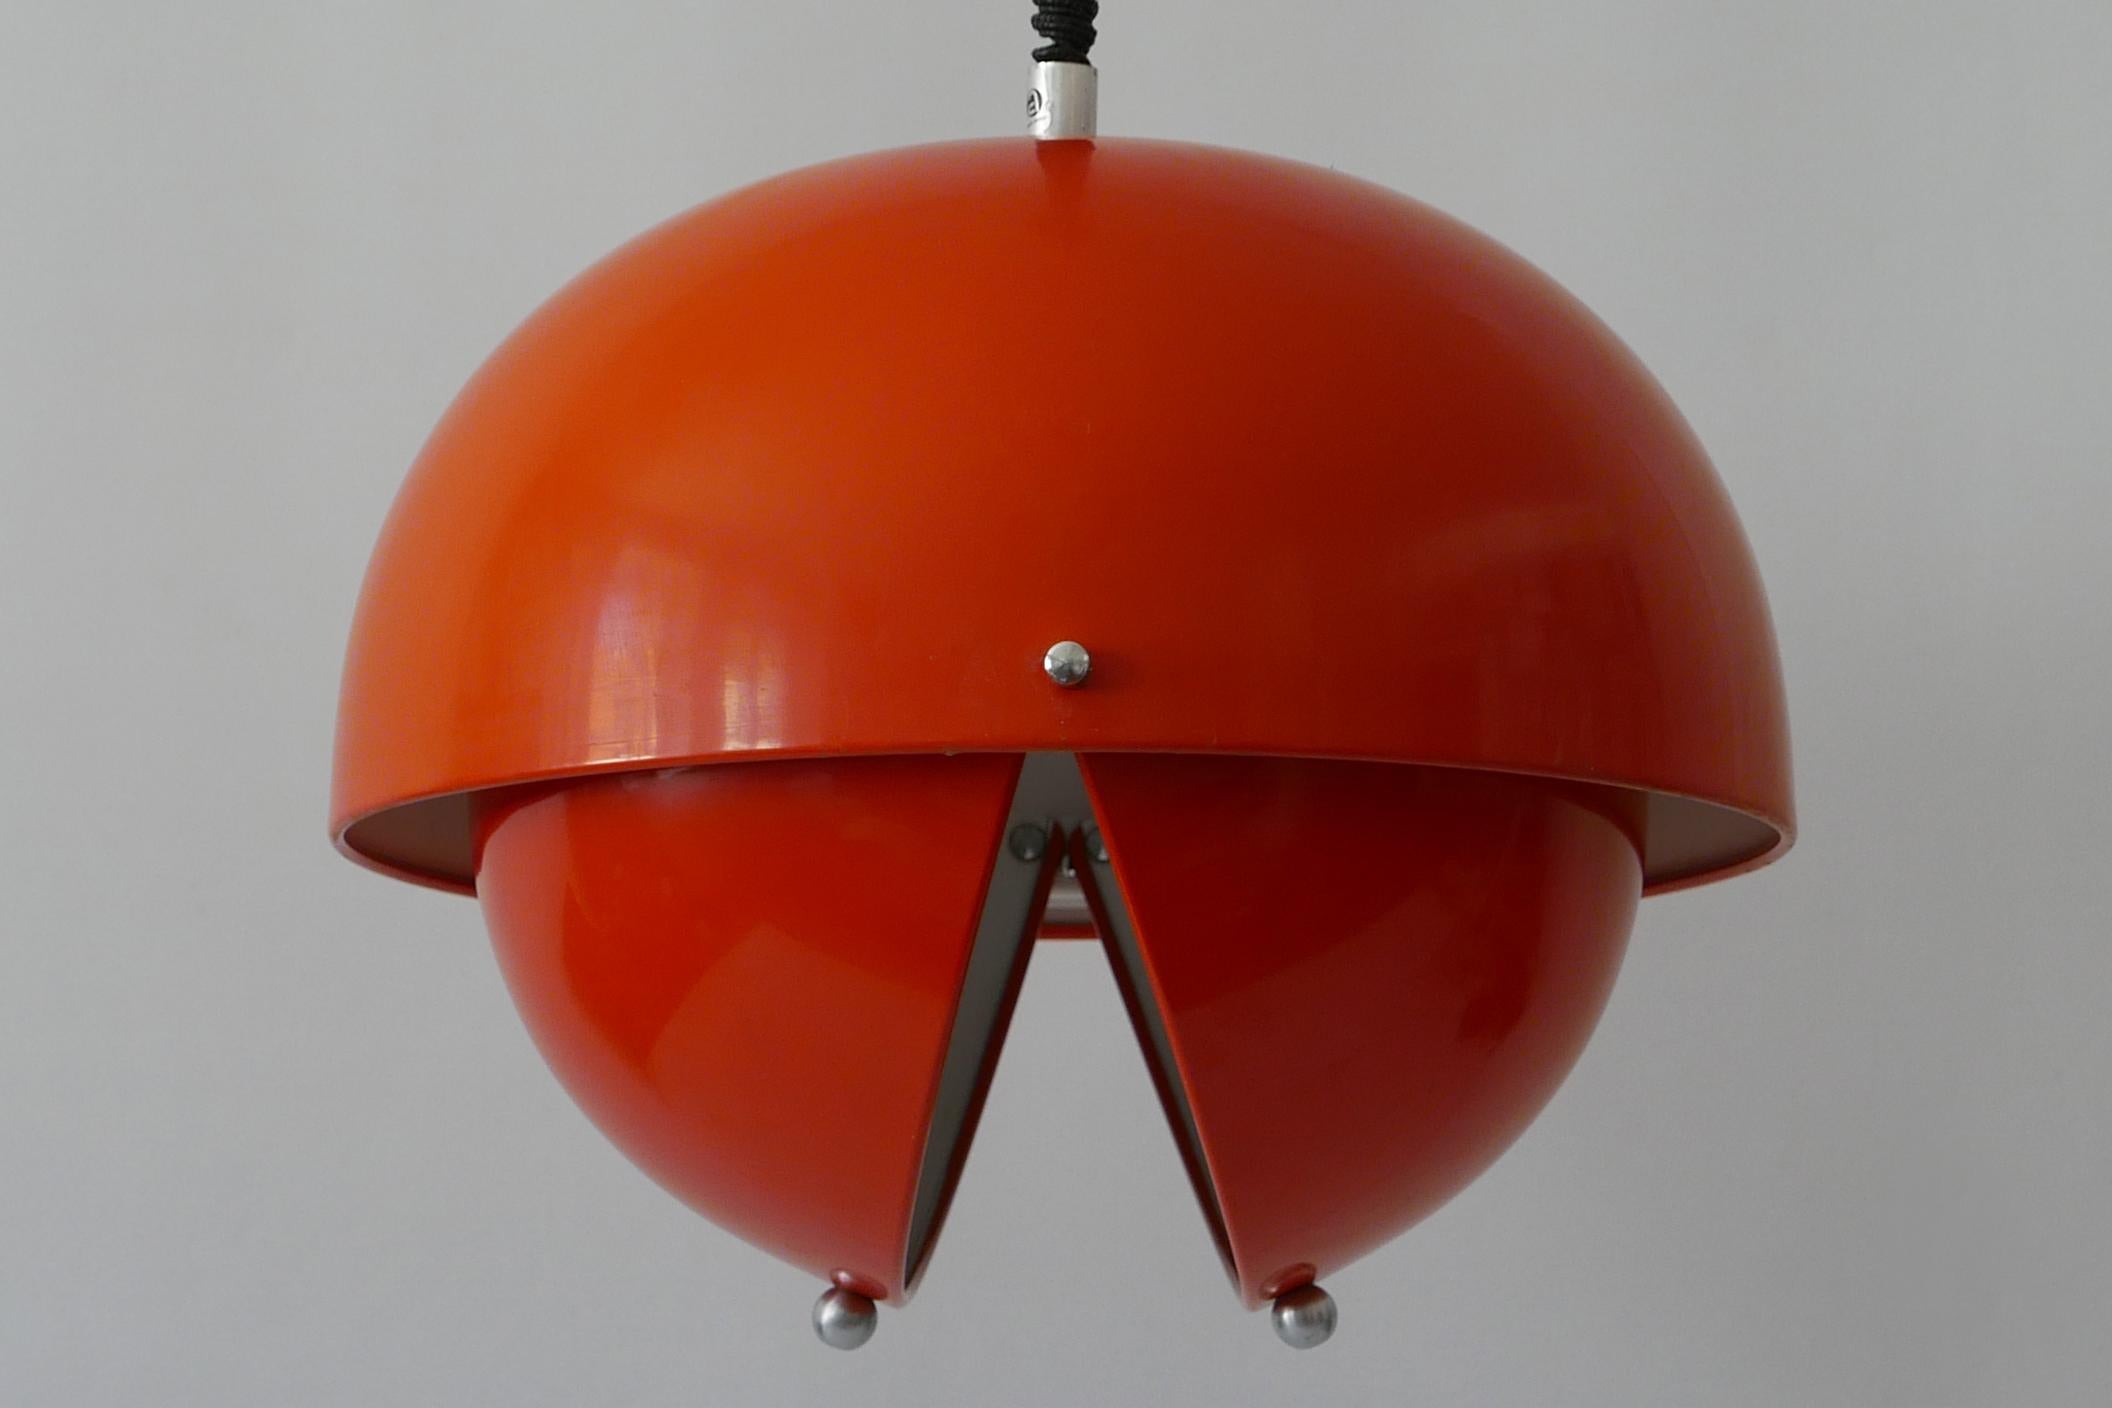 A real and rare piece from Flower Power era: highly decorative Mid-Century Modern pendant lamp or hanging light. The light fall can be adjusted. Manufactured by Archi Design, Italy, 1960s. Makers label to the top.

Executed in orange enameled